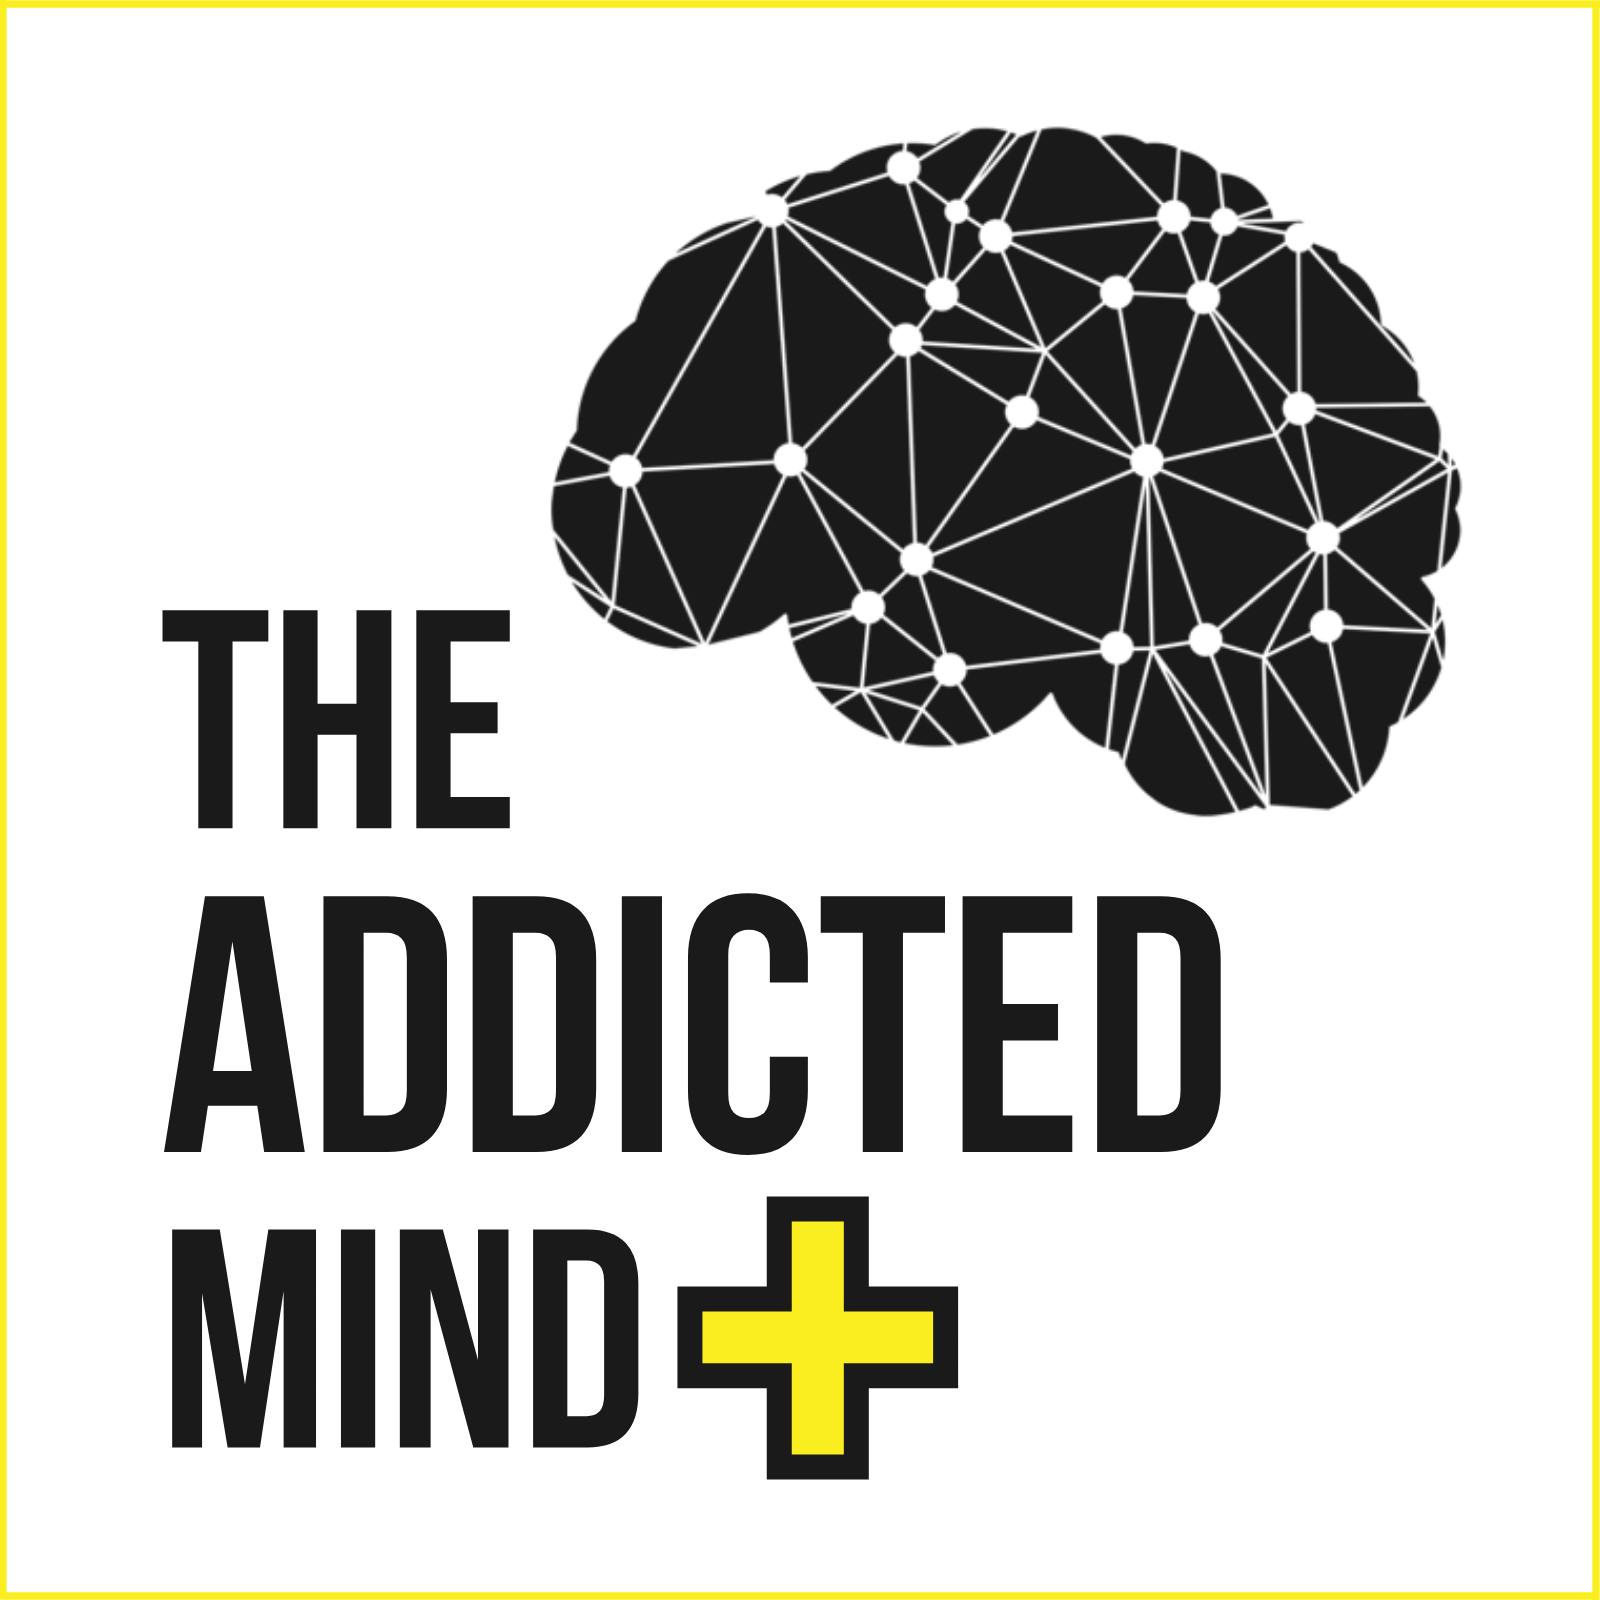 TAM+ Episode 20: From Denial to Acceptance: The Emotional Journey of Addiction Recovery